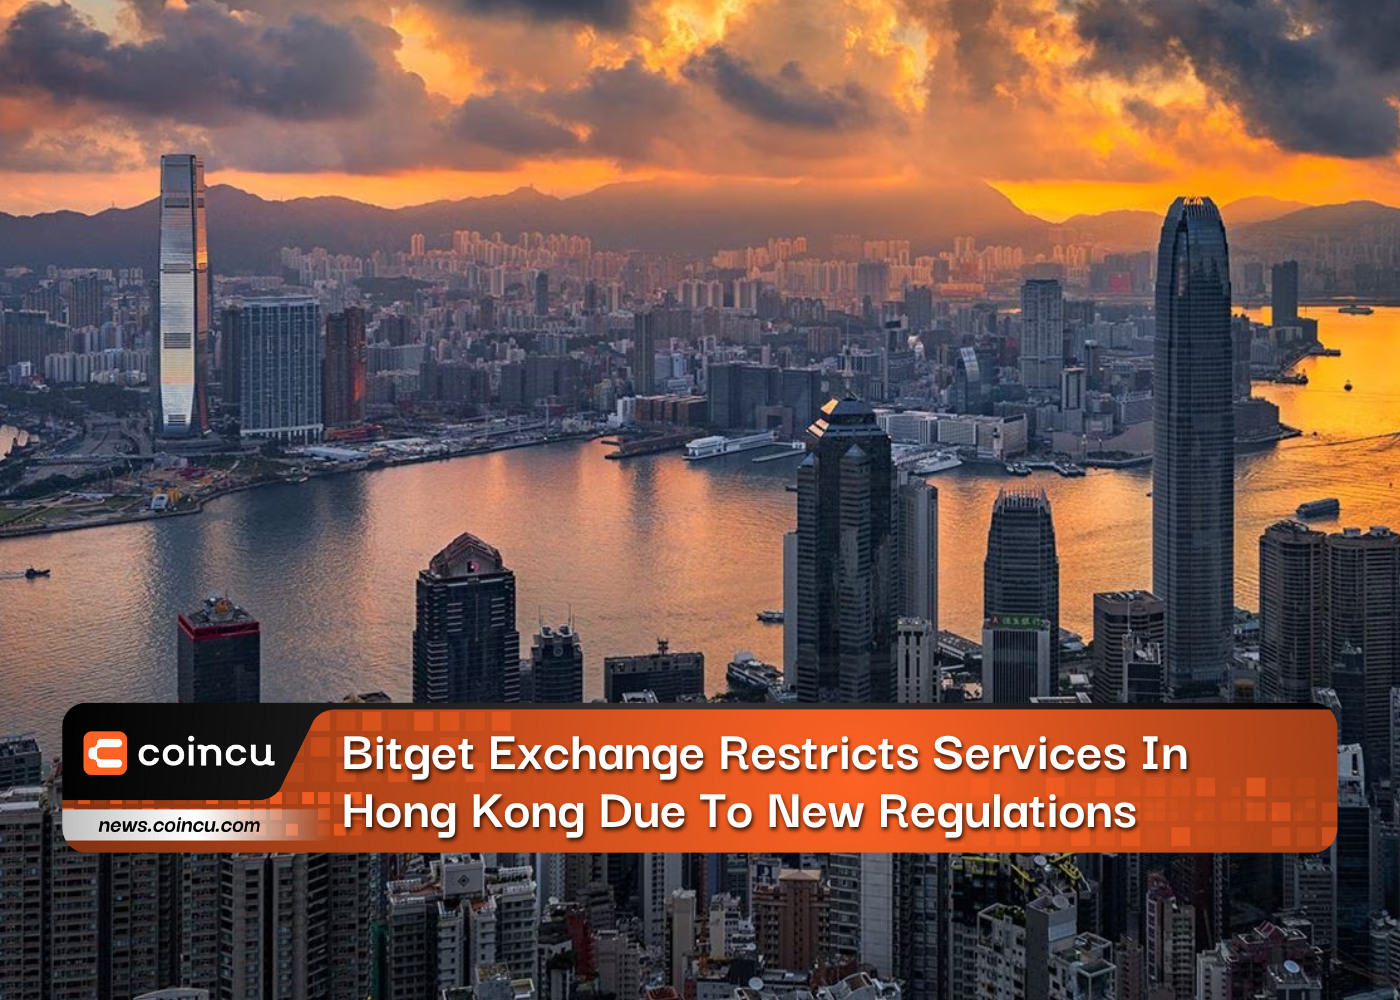 Bitget Exchange Restricts Services In Hong Kong Due To New Regulations